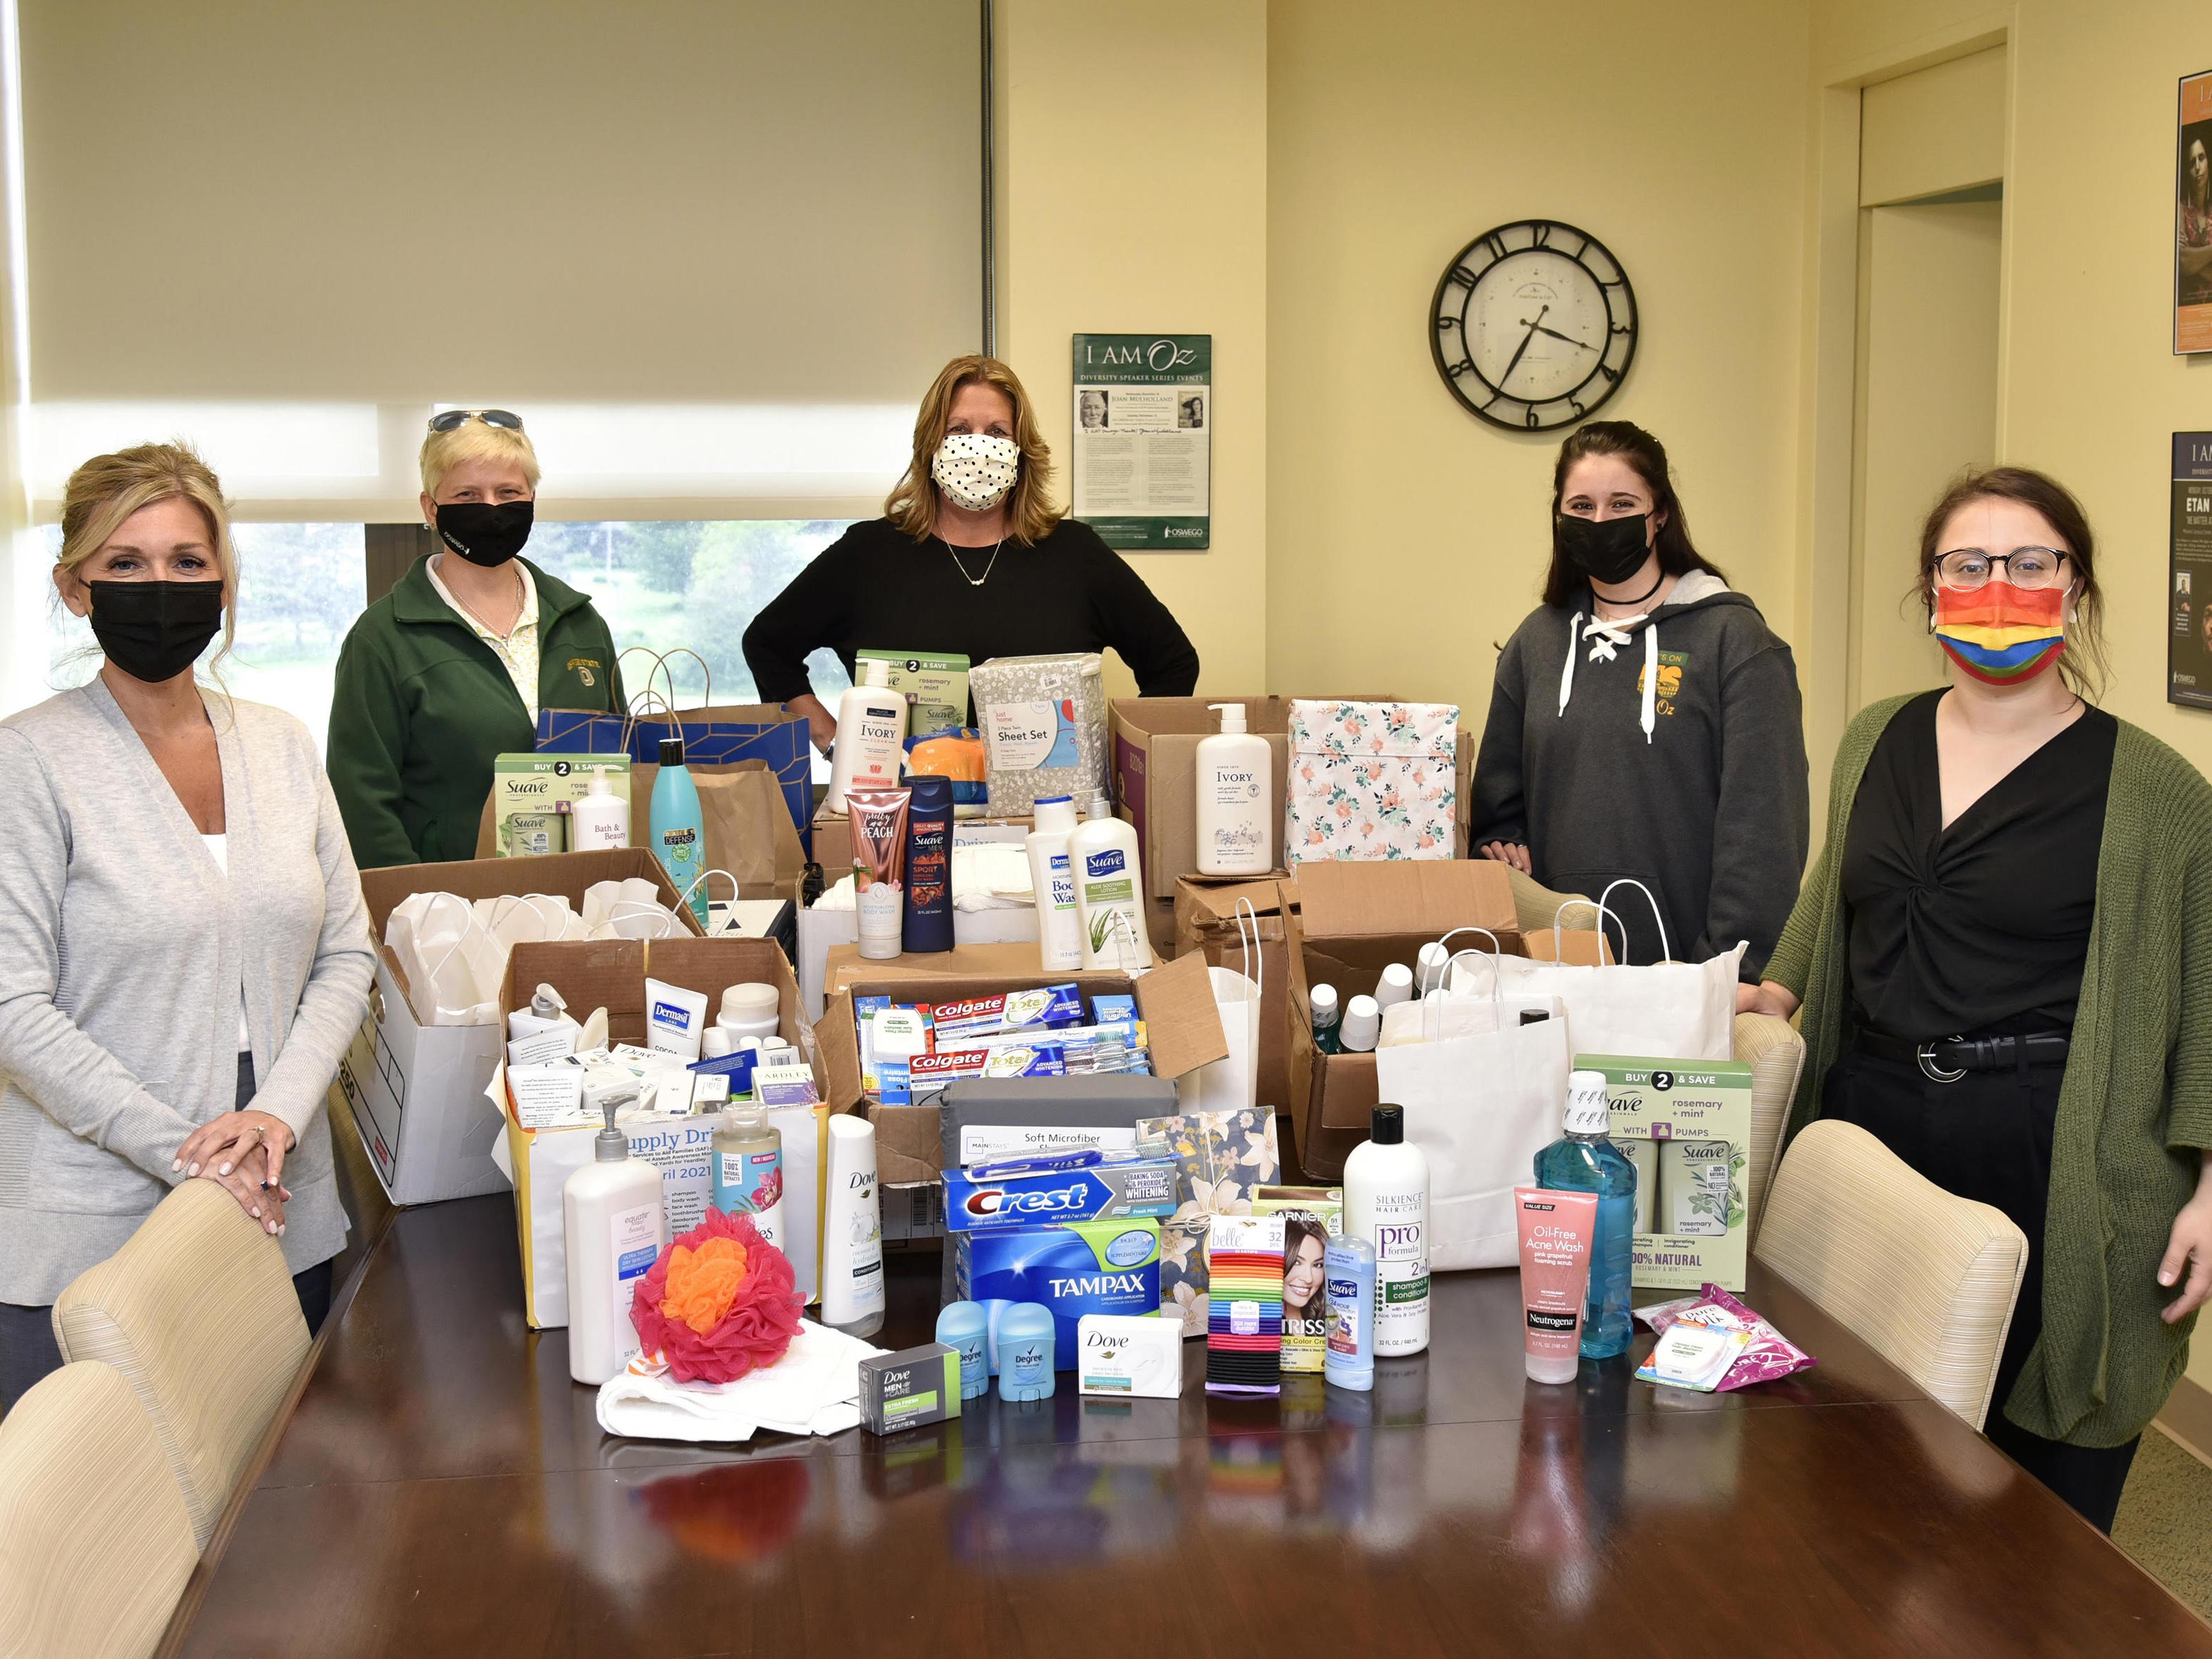 A SUNY Oswego collection drive netting $2000 in materials that will benefit families fleeing domestic violence in Oswego County